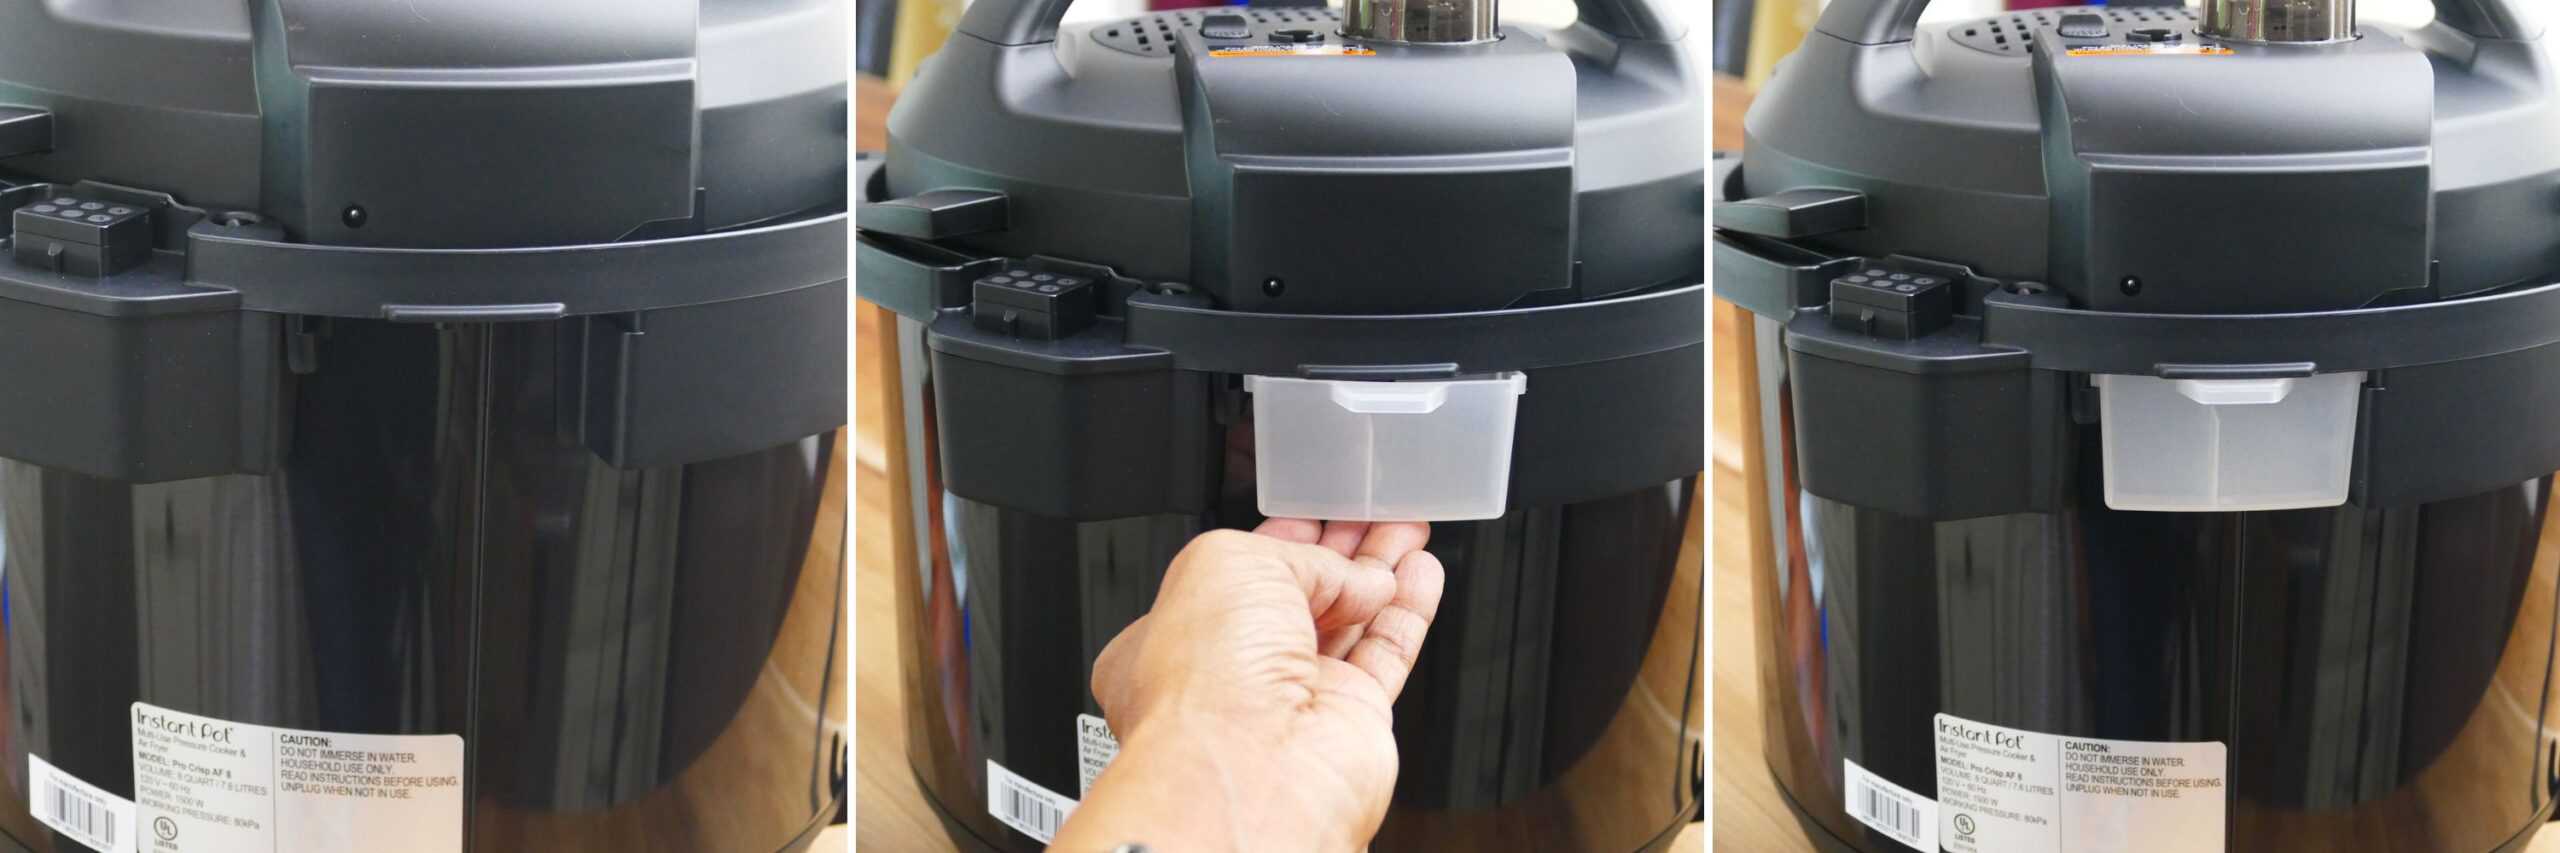 instant pot pro crisp collage - condensation collector being put in place